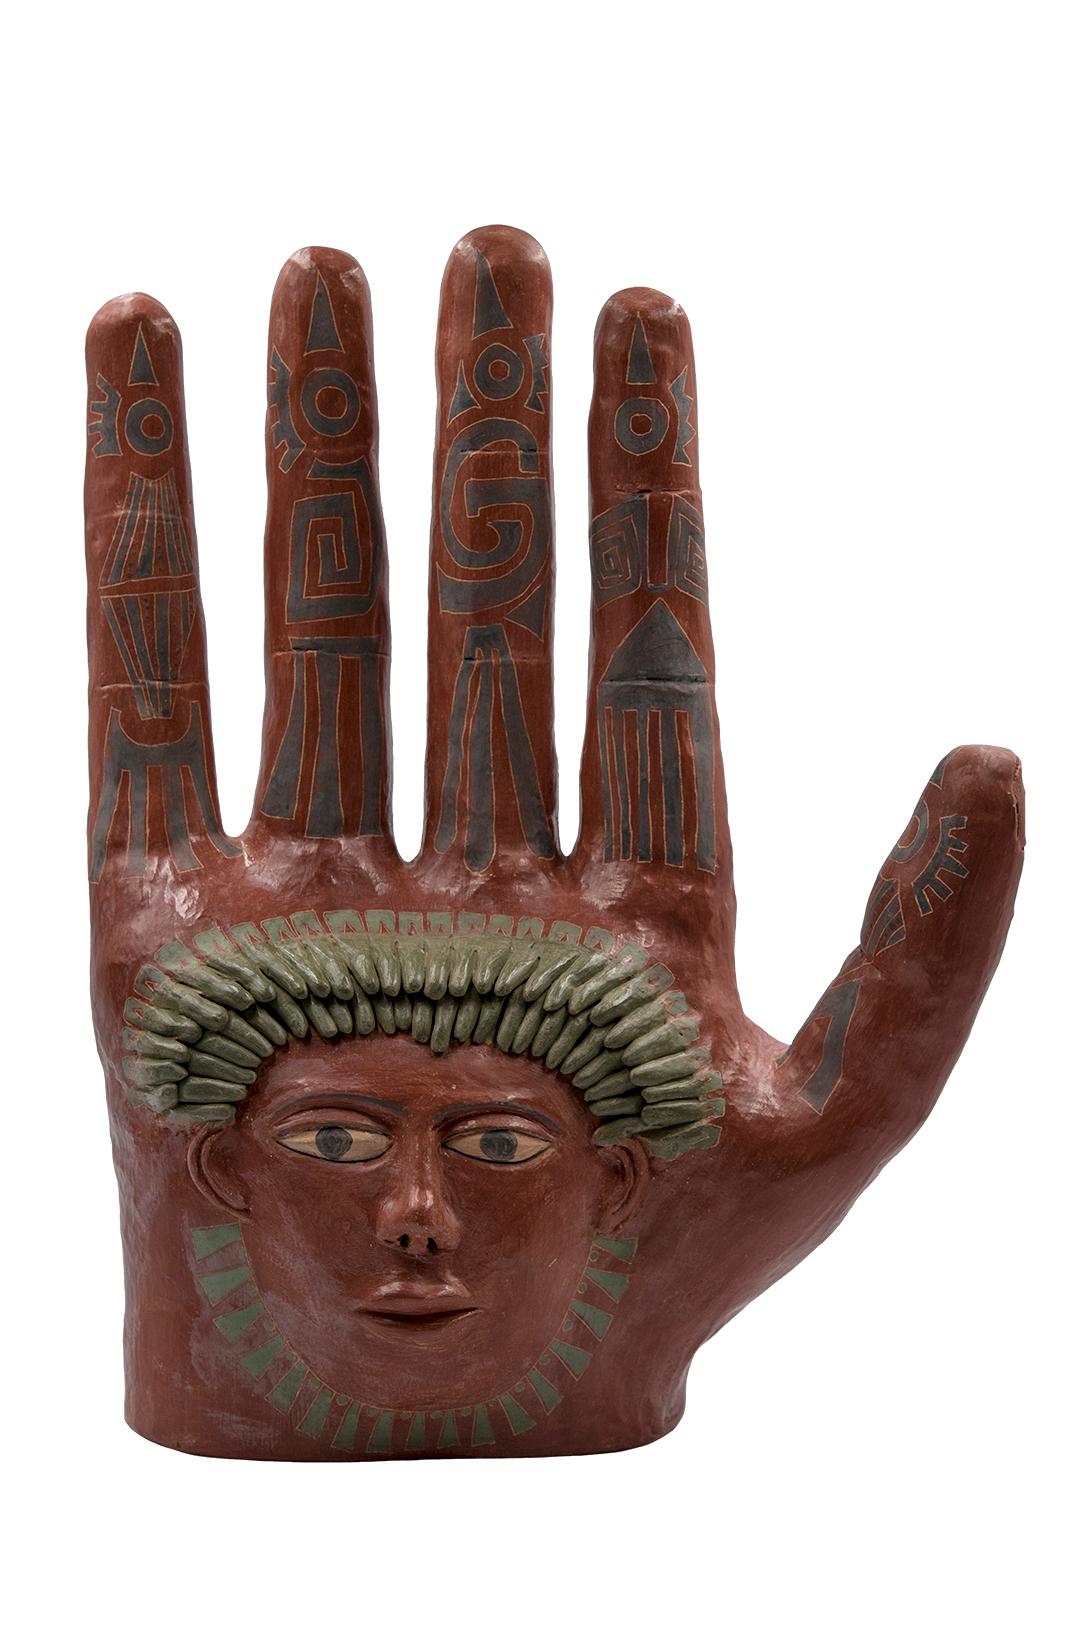 This Mexican red ceramic clay hand sculpture is a piece by artist Manuel Reyes. Made with clay from Oaxaca and Zacatecas, painted with oxides from the region. Done with the hand-modeled technique and cooked in traditional wood-fired oven. The hand